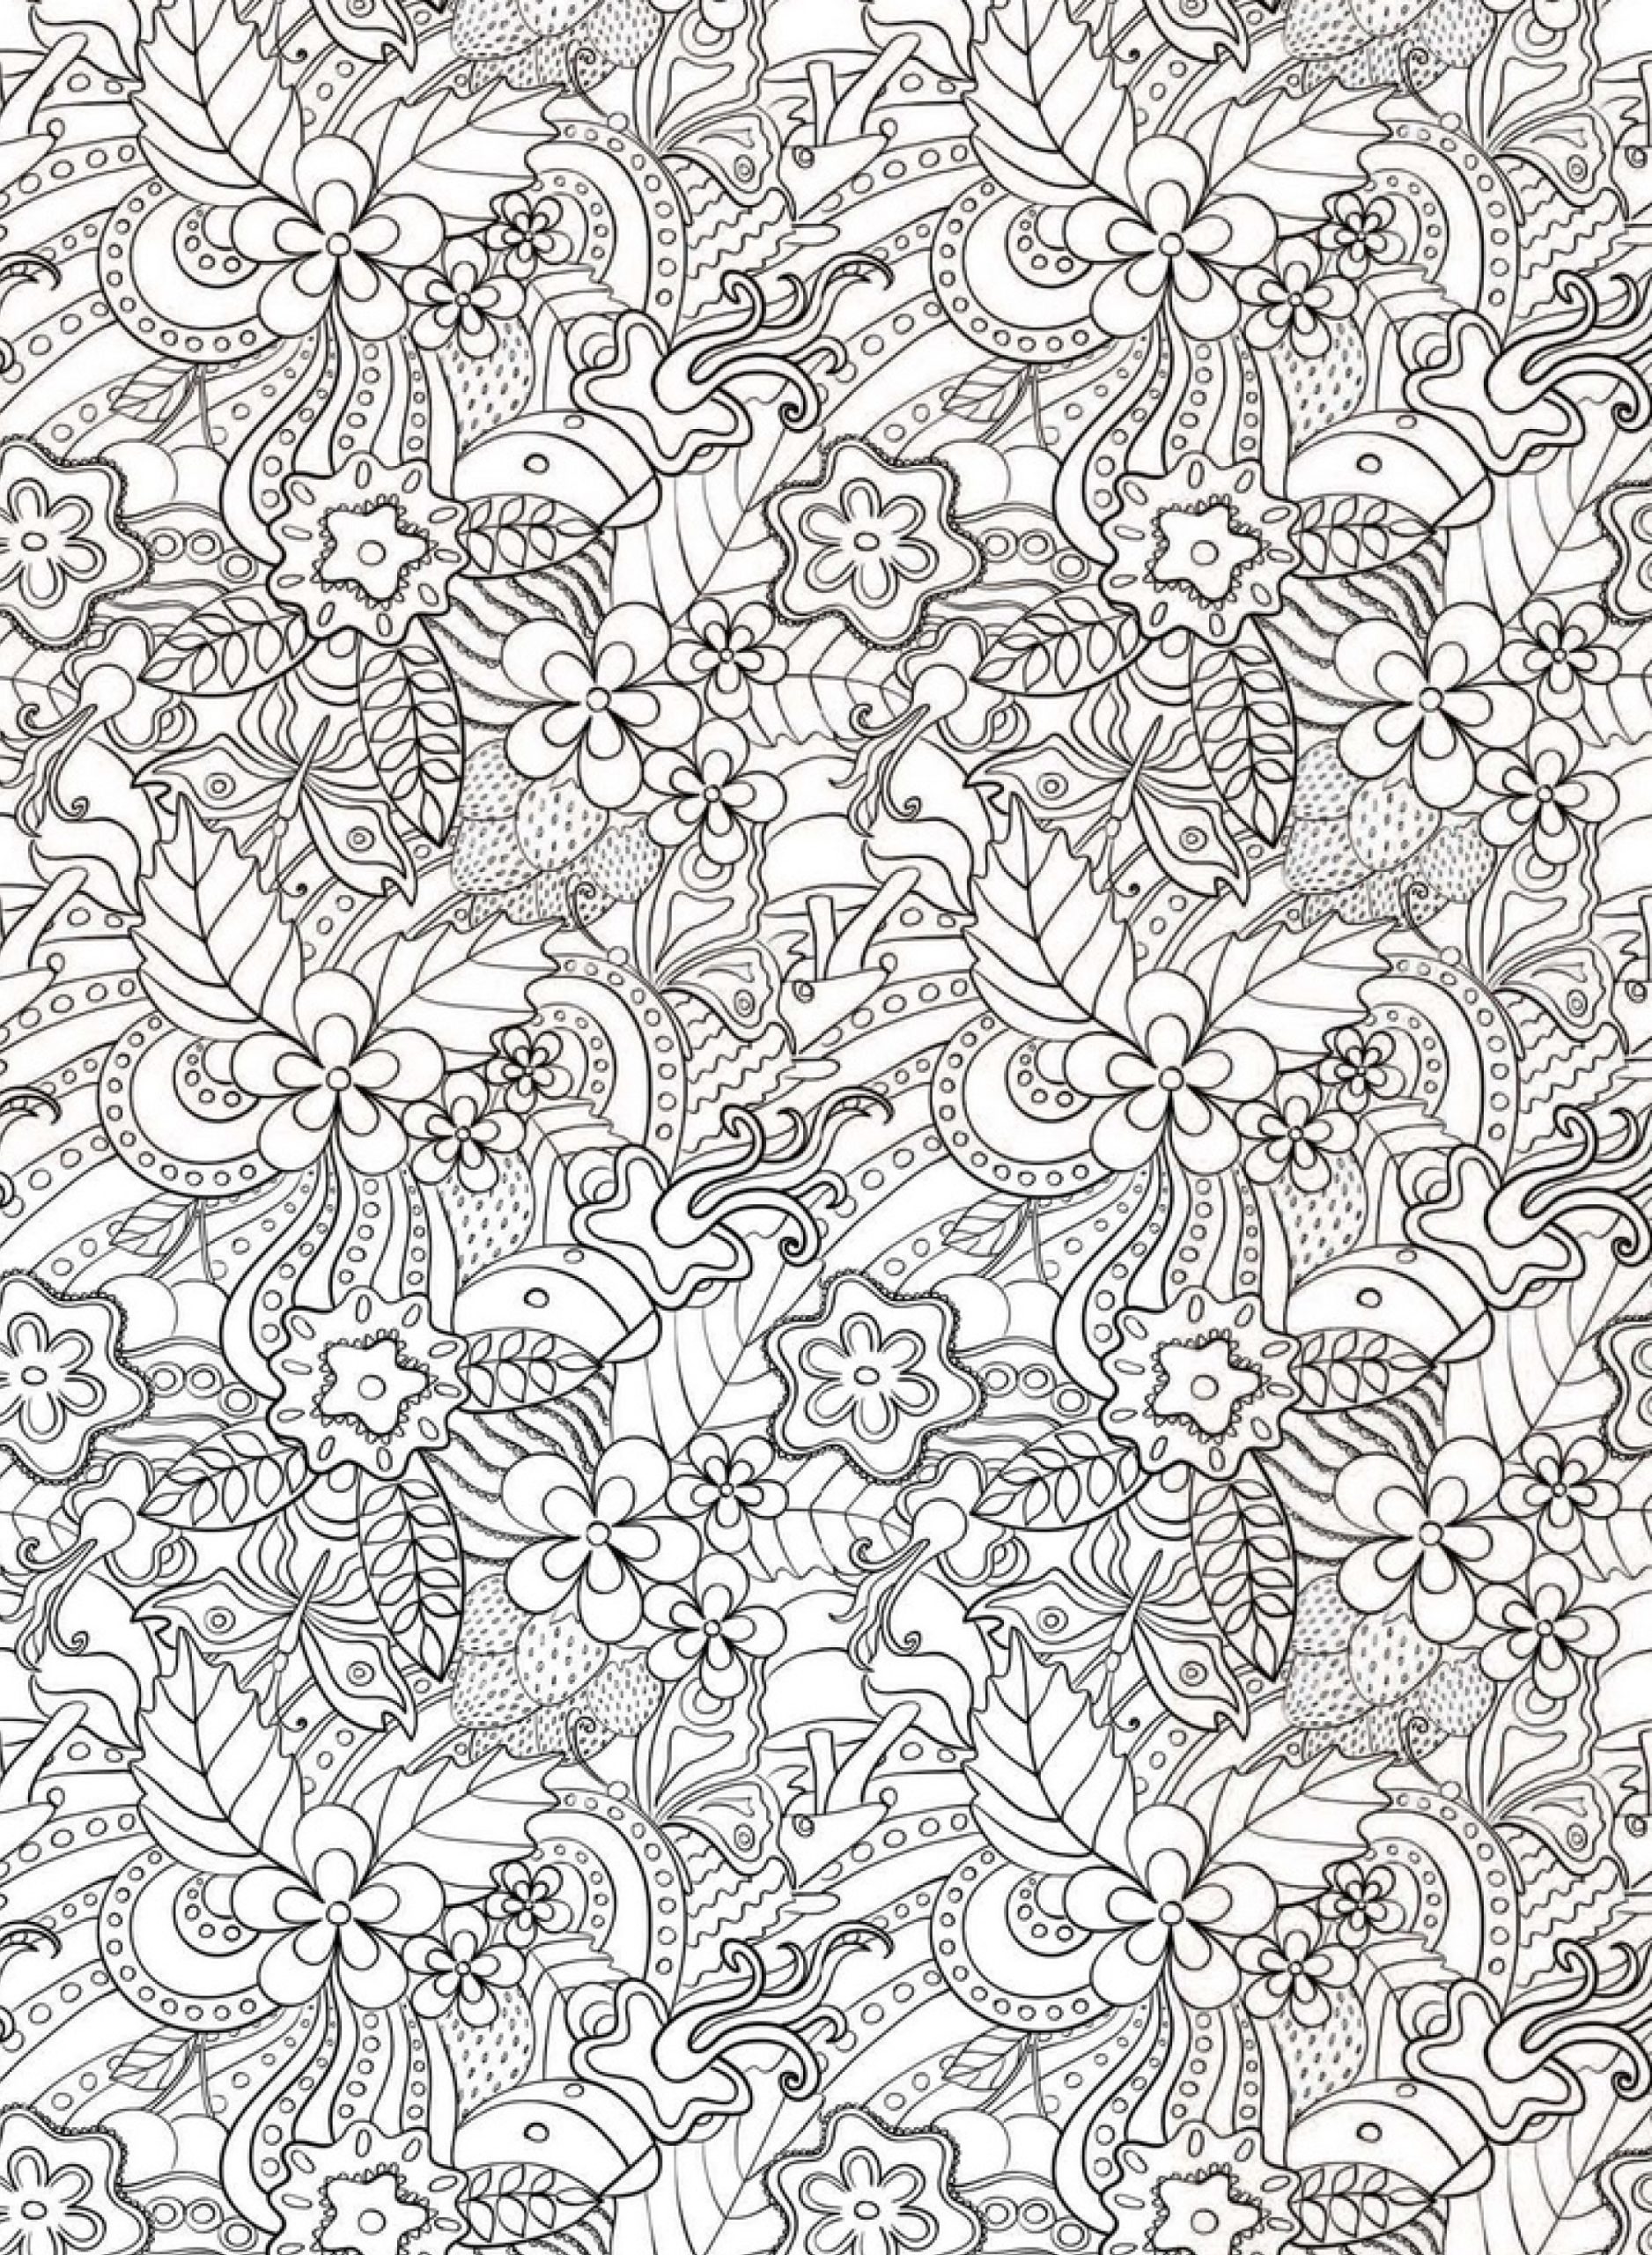 Coloring 101 for Adults: The Ultimate Guide - Art Therapy Coloring